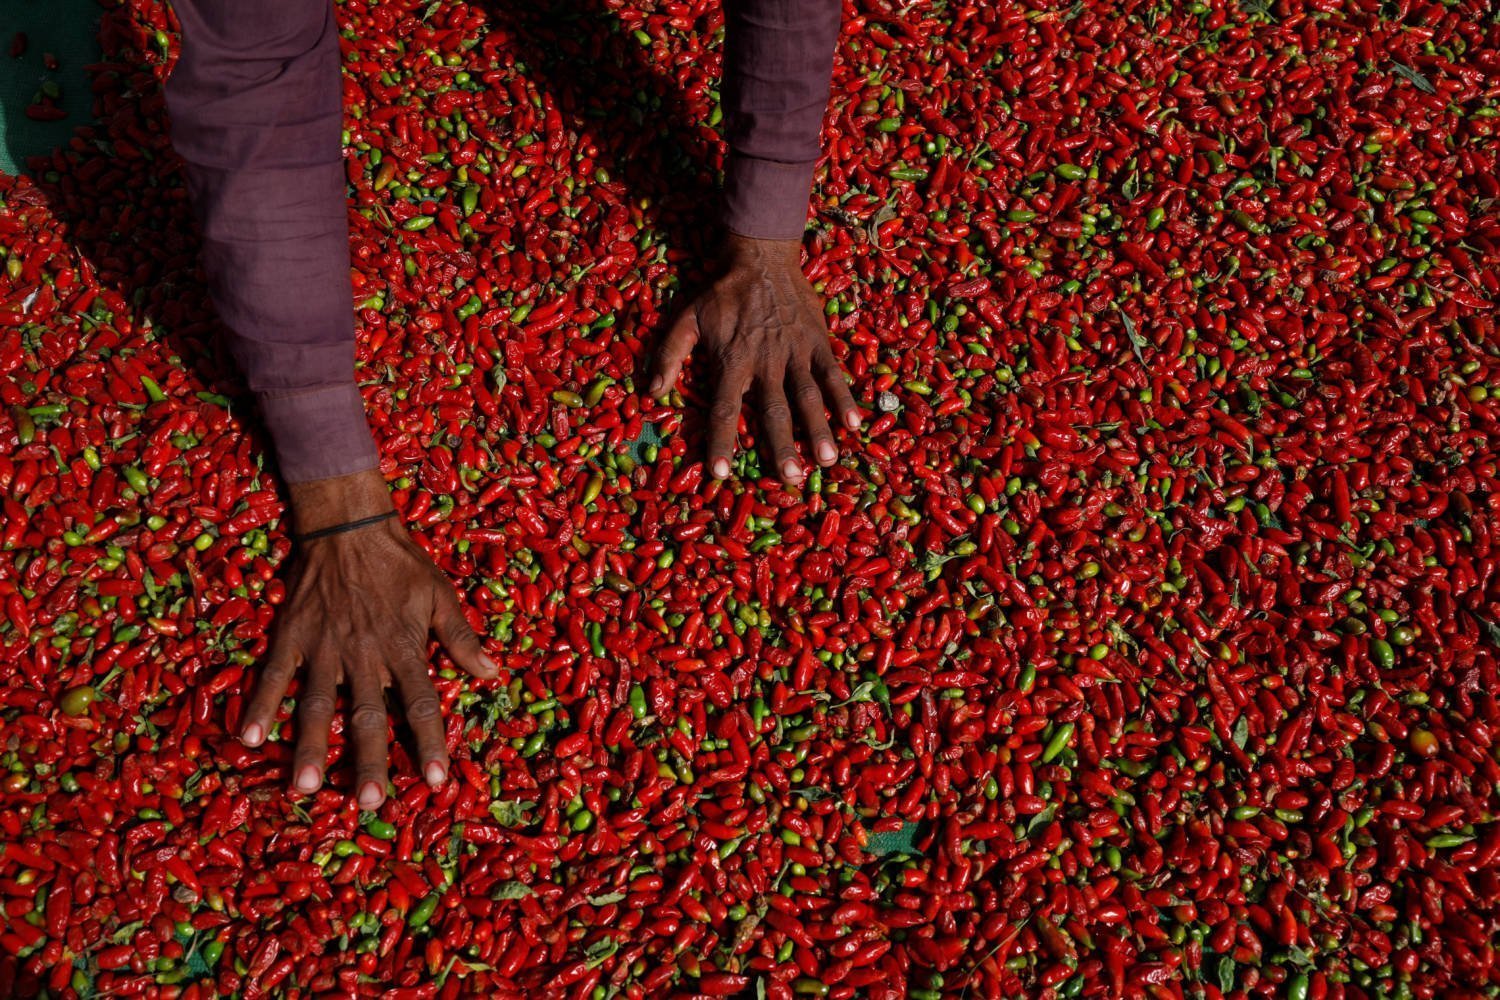 The Wider Image: Pakistani Farmers Fight A Losing Battle To Save Chili Crop